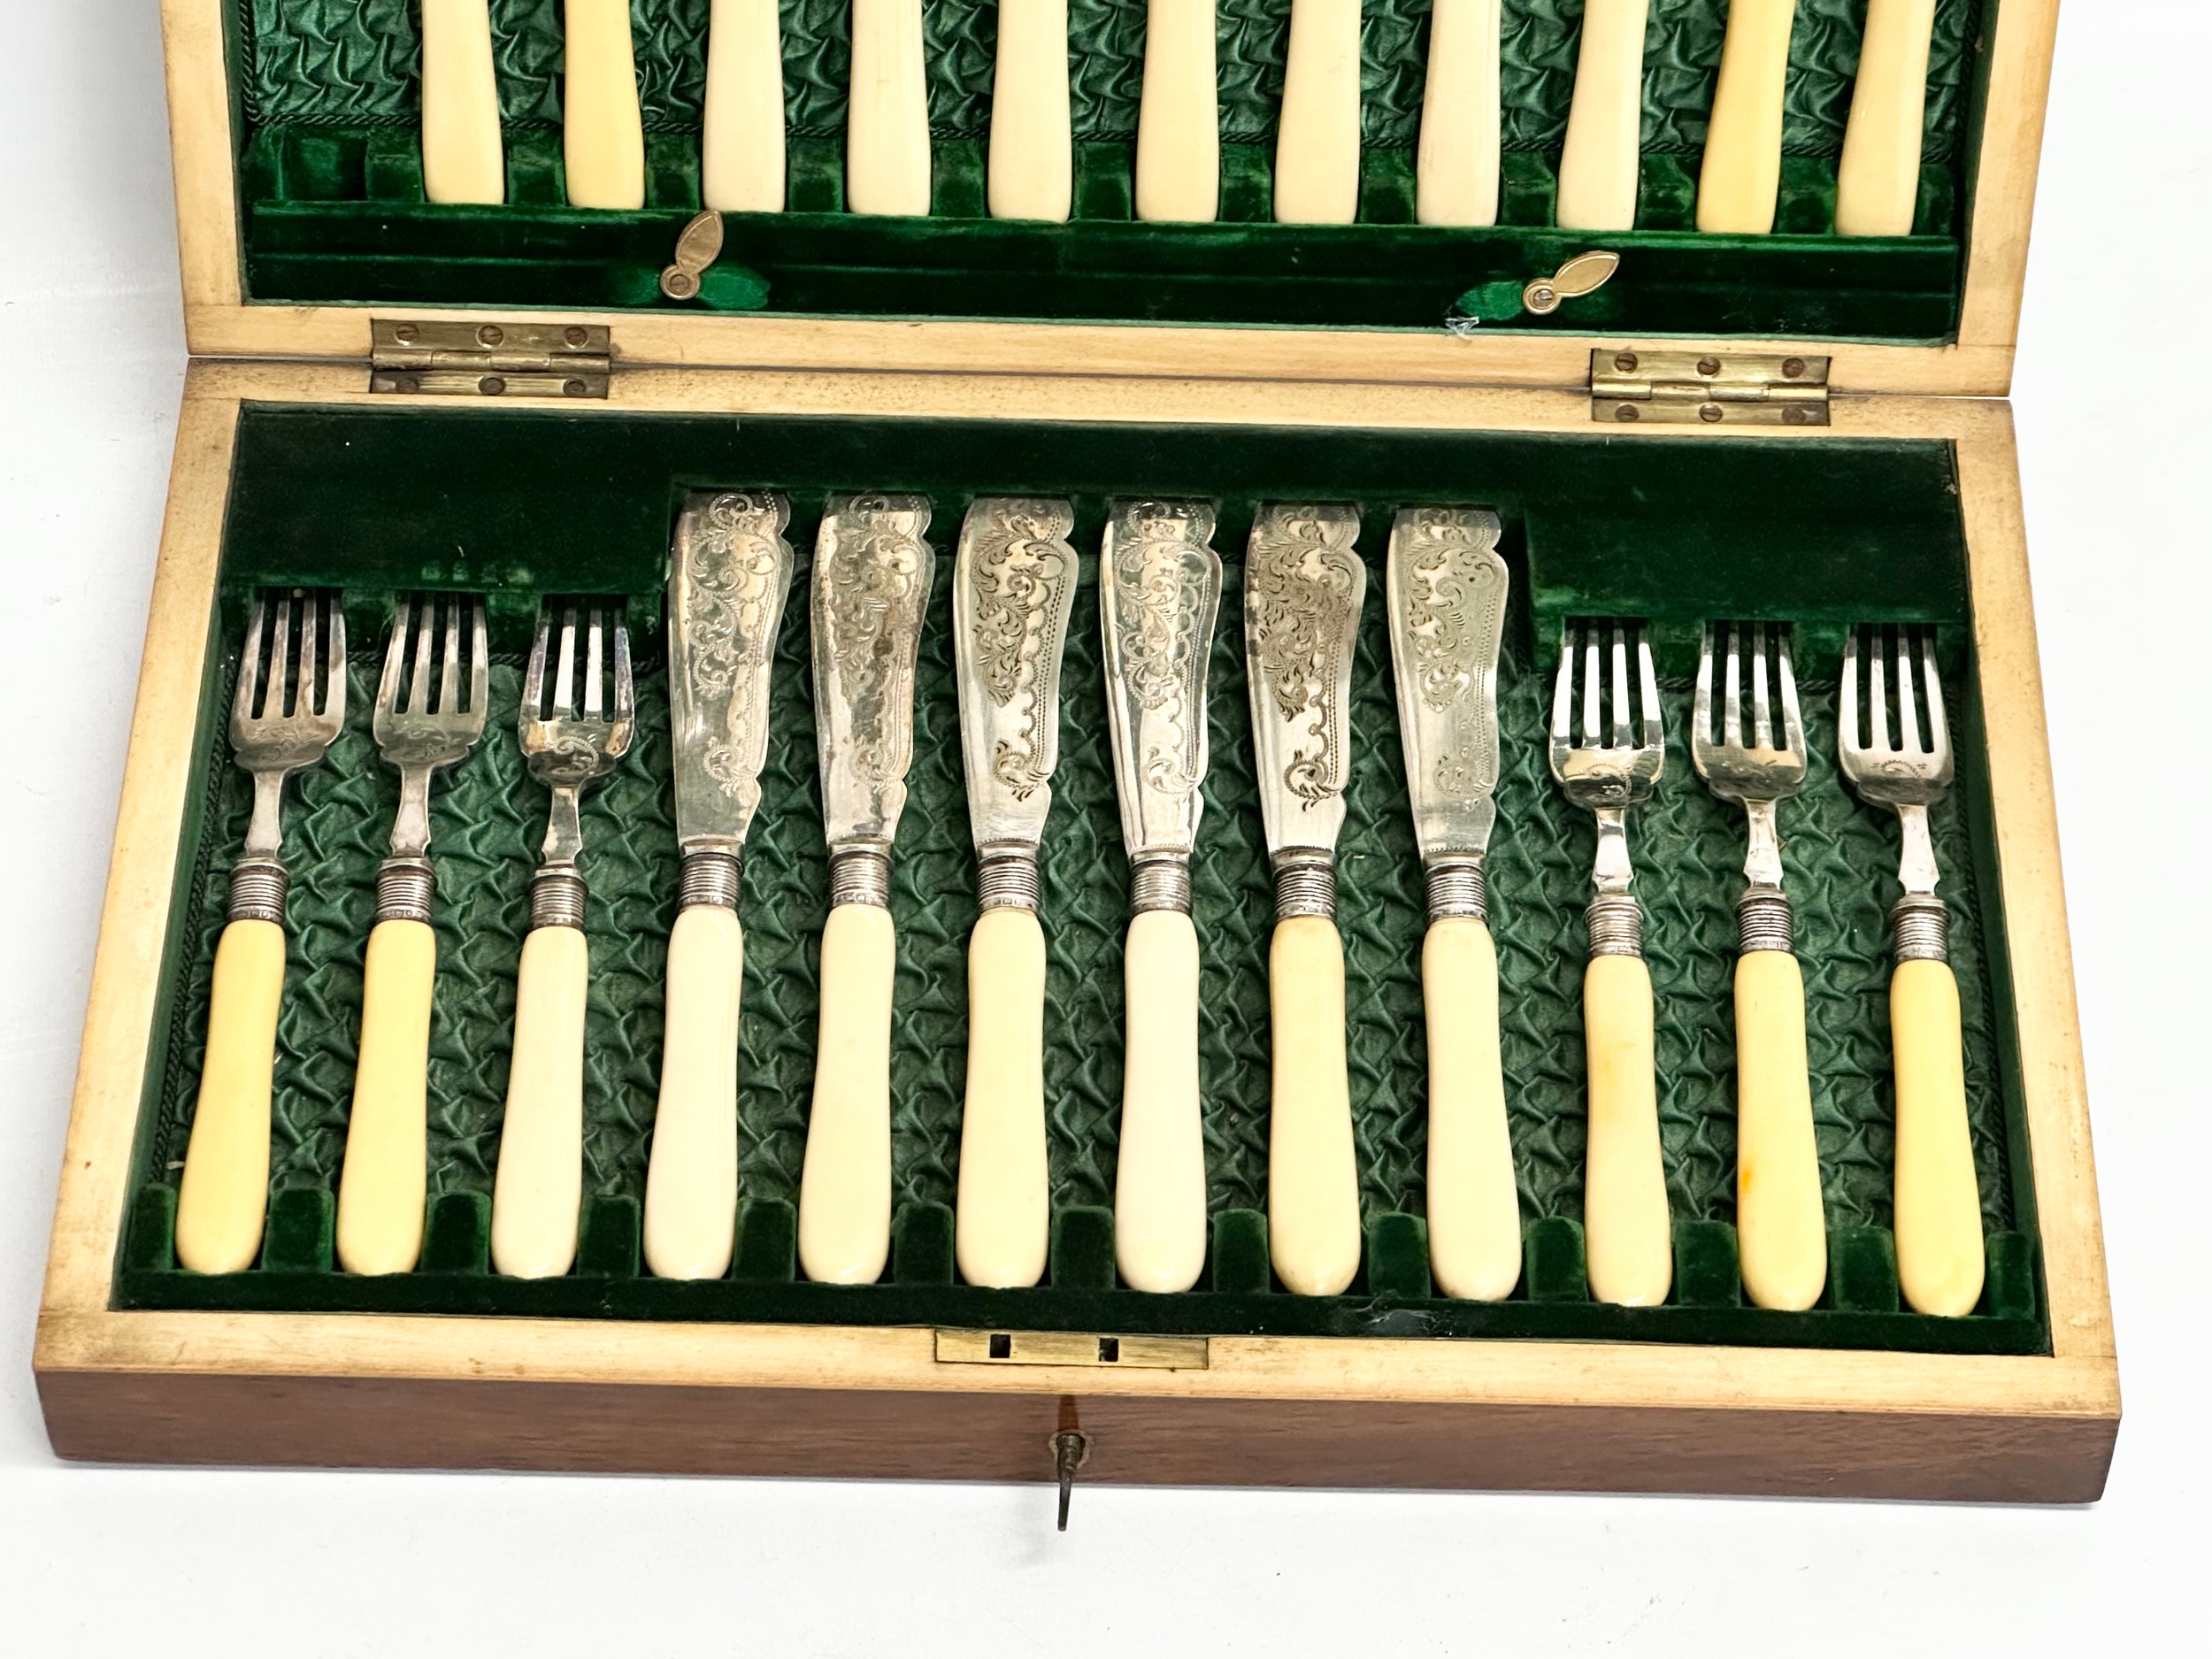 A Late 19th Century silver mounted cutlery set in mahogany case. 39.5x26.5x6.5cm - Image 2 of 5